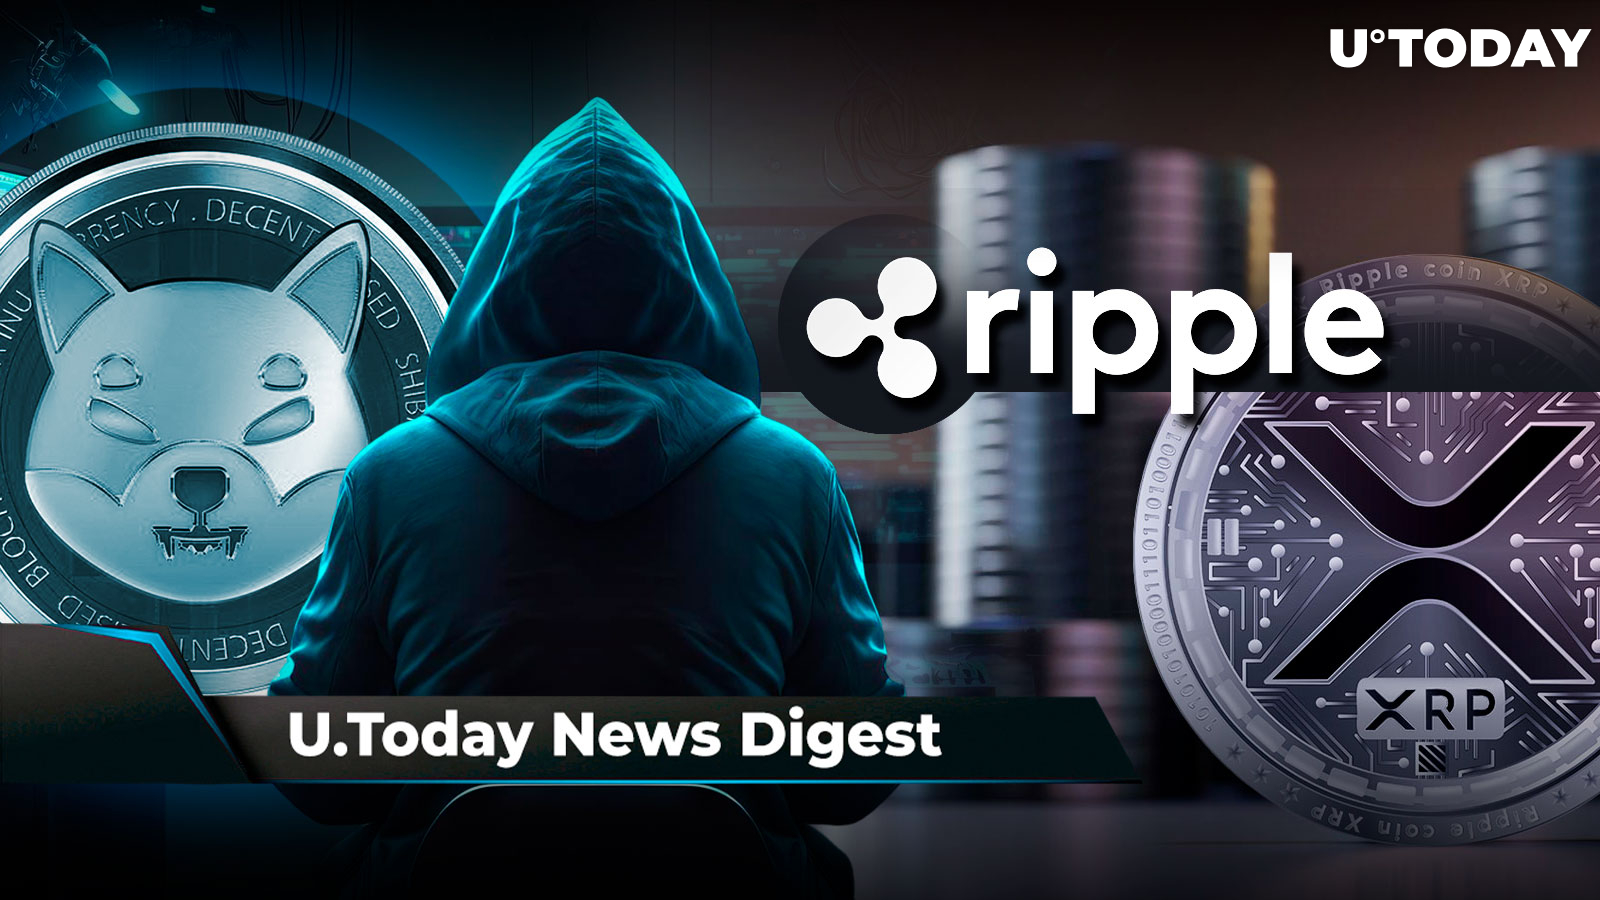 SHIB Lead Shytoshi Kusama Comes out of 'Quiet Mode,' Ripple Helps Move Almost 500 Million XRP, Robert Kiyosaki Reveals Top Assets for Average Investors: Crypto News Digest by U.Today